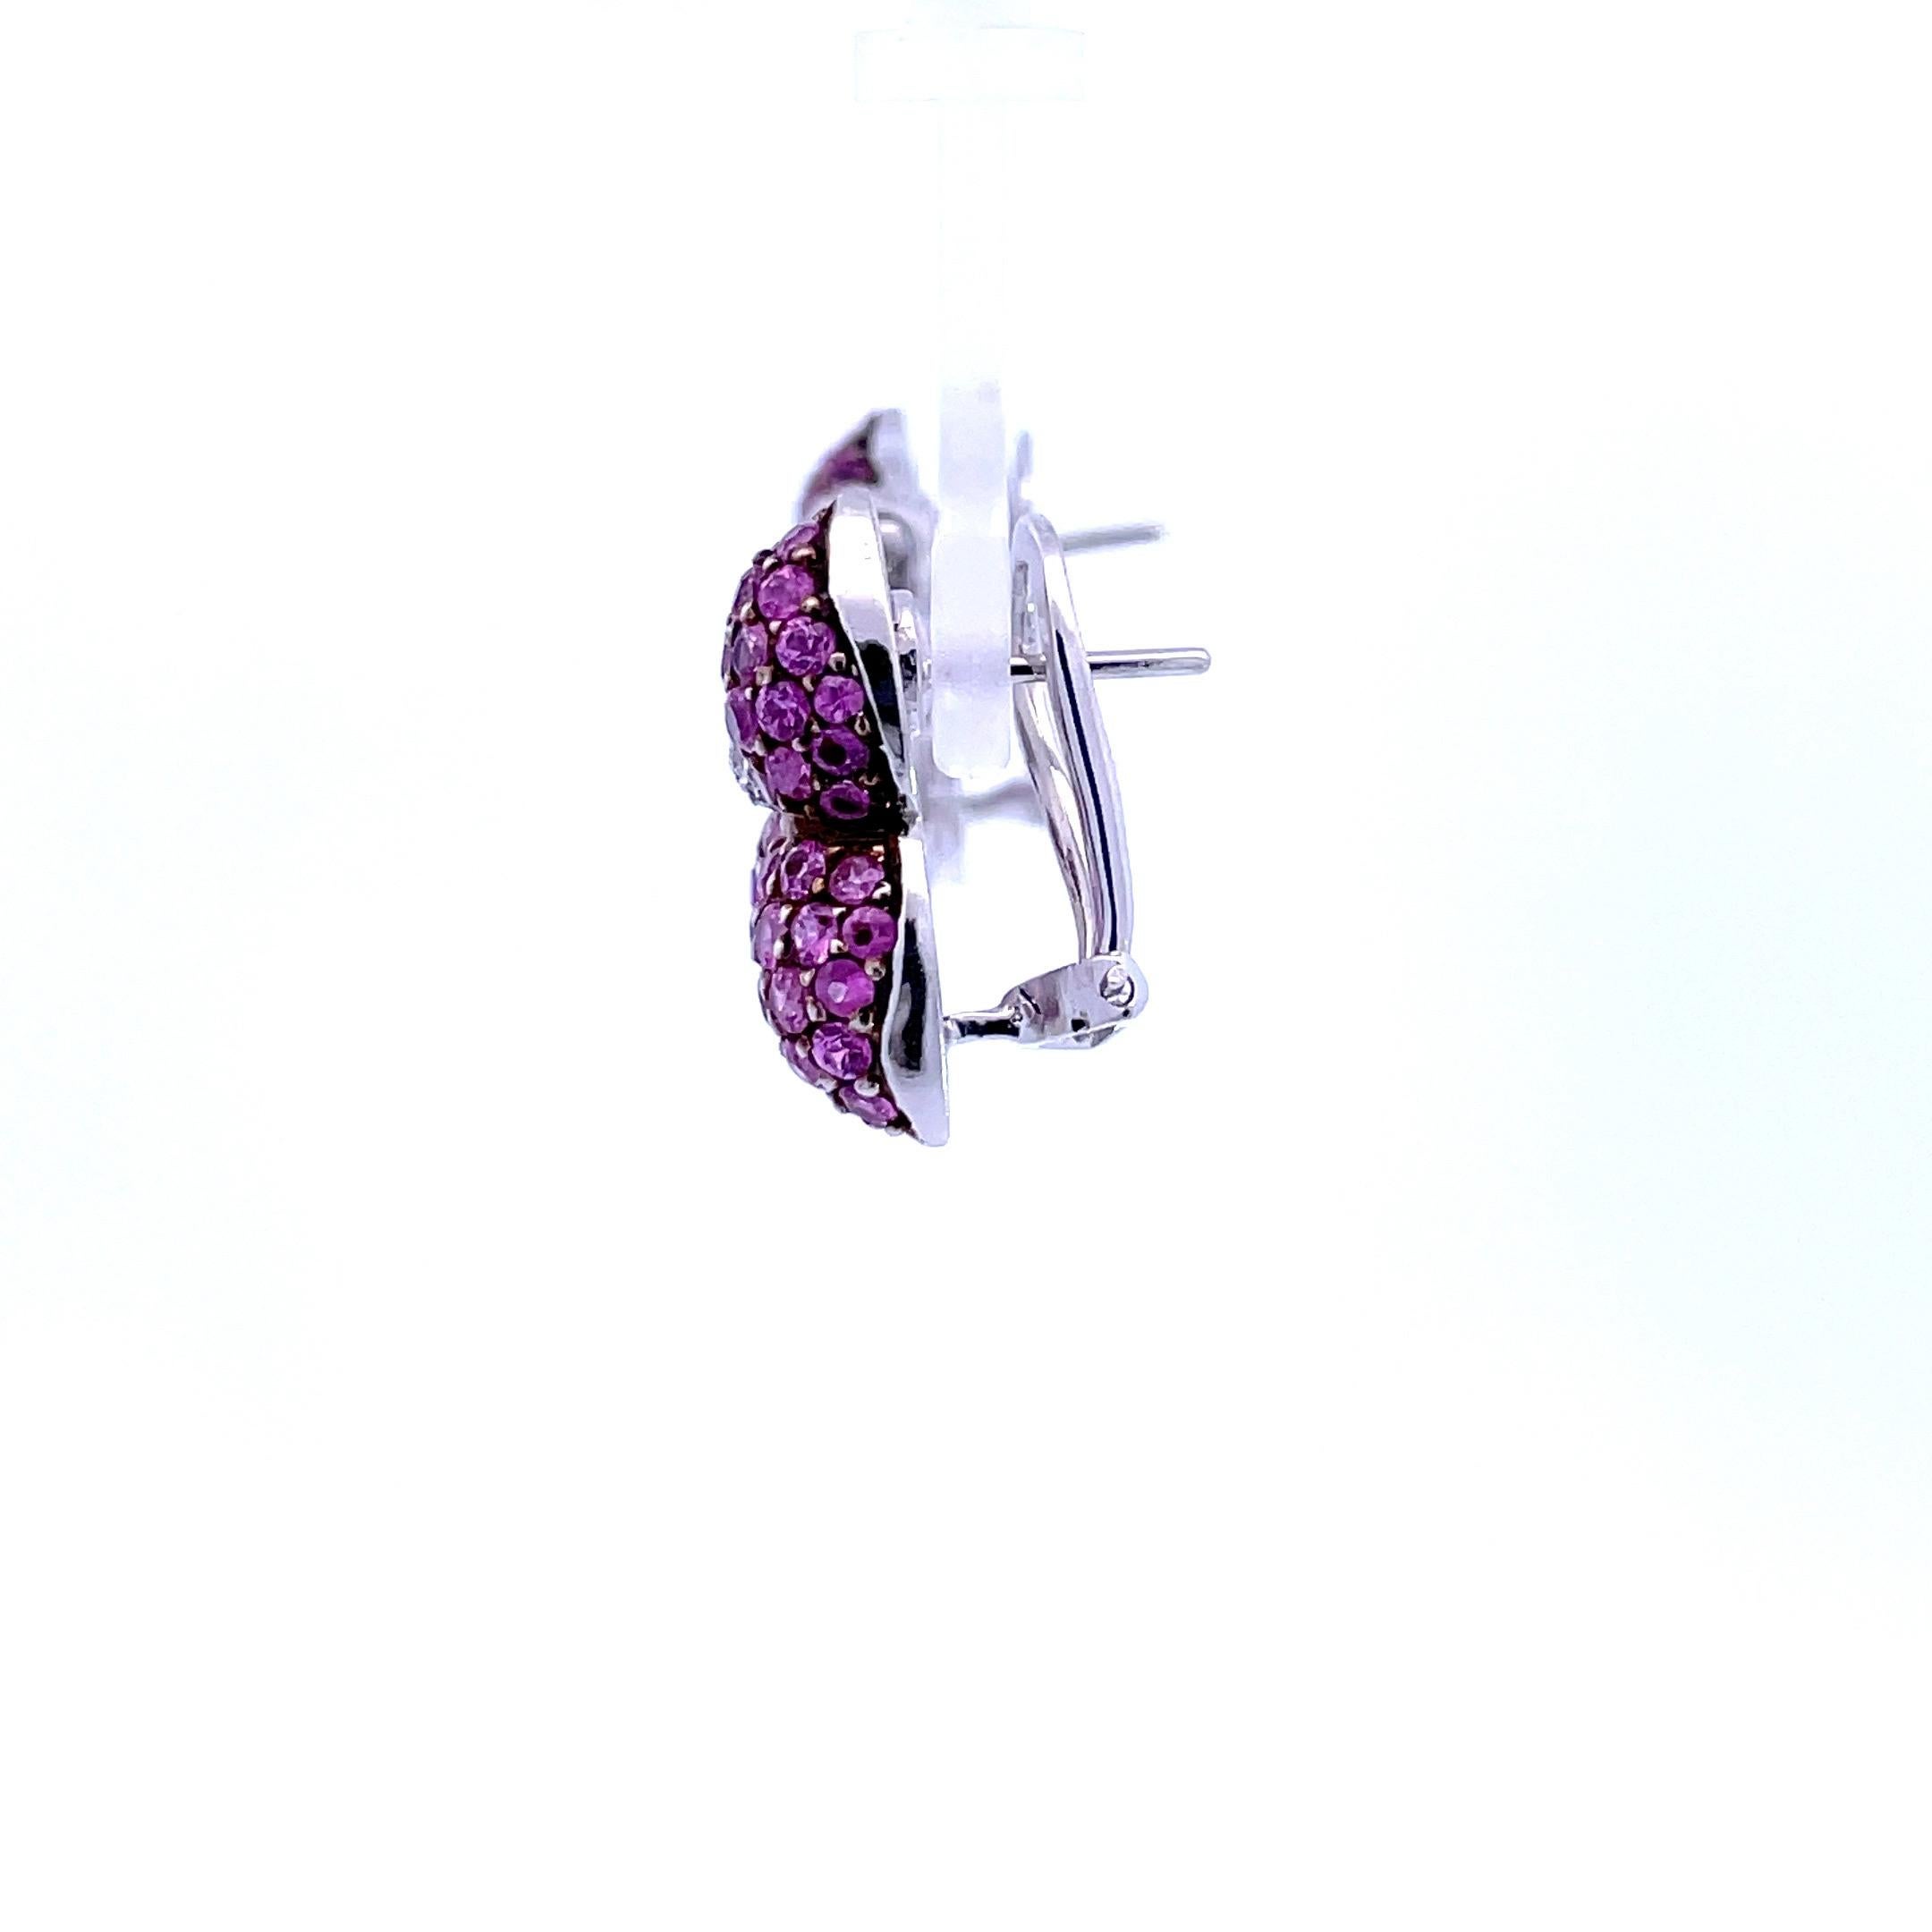 A large pair of natural pink sapphire and natural diamond earrings set in 18 Kt  white gold highlighted with a black rhodium finish straight post and omega system.

40 Brilliant cut natural diamonds weighing 0.30ct total weight, quality G/VS

128